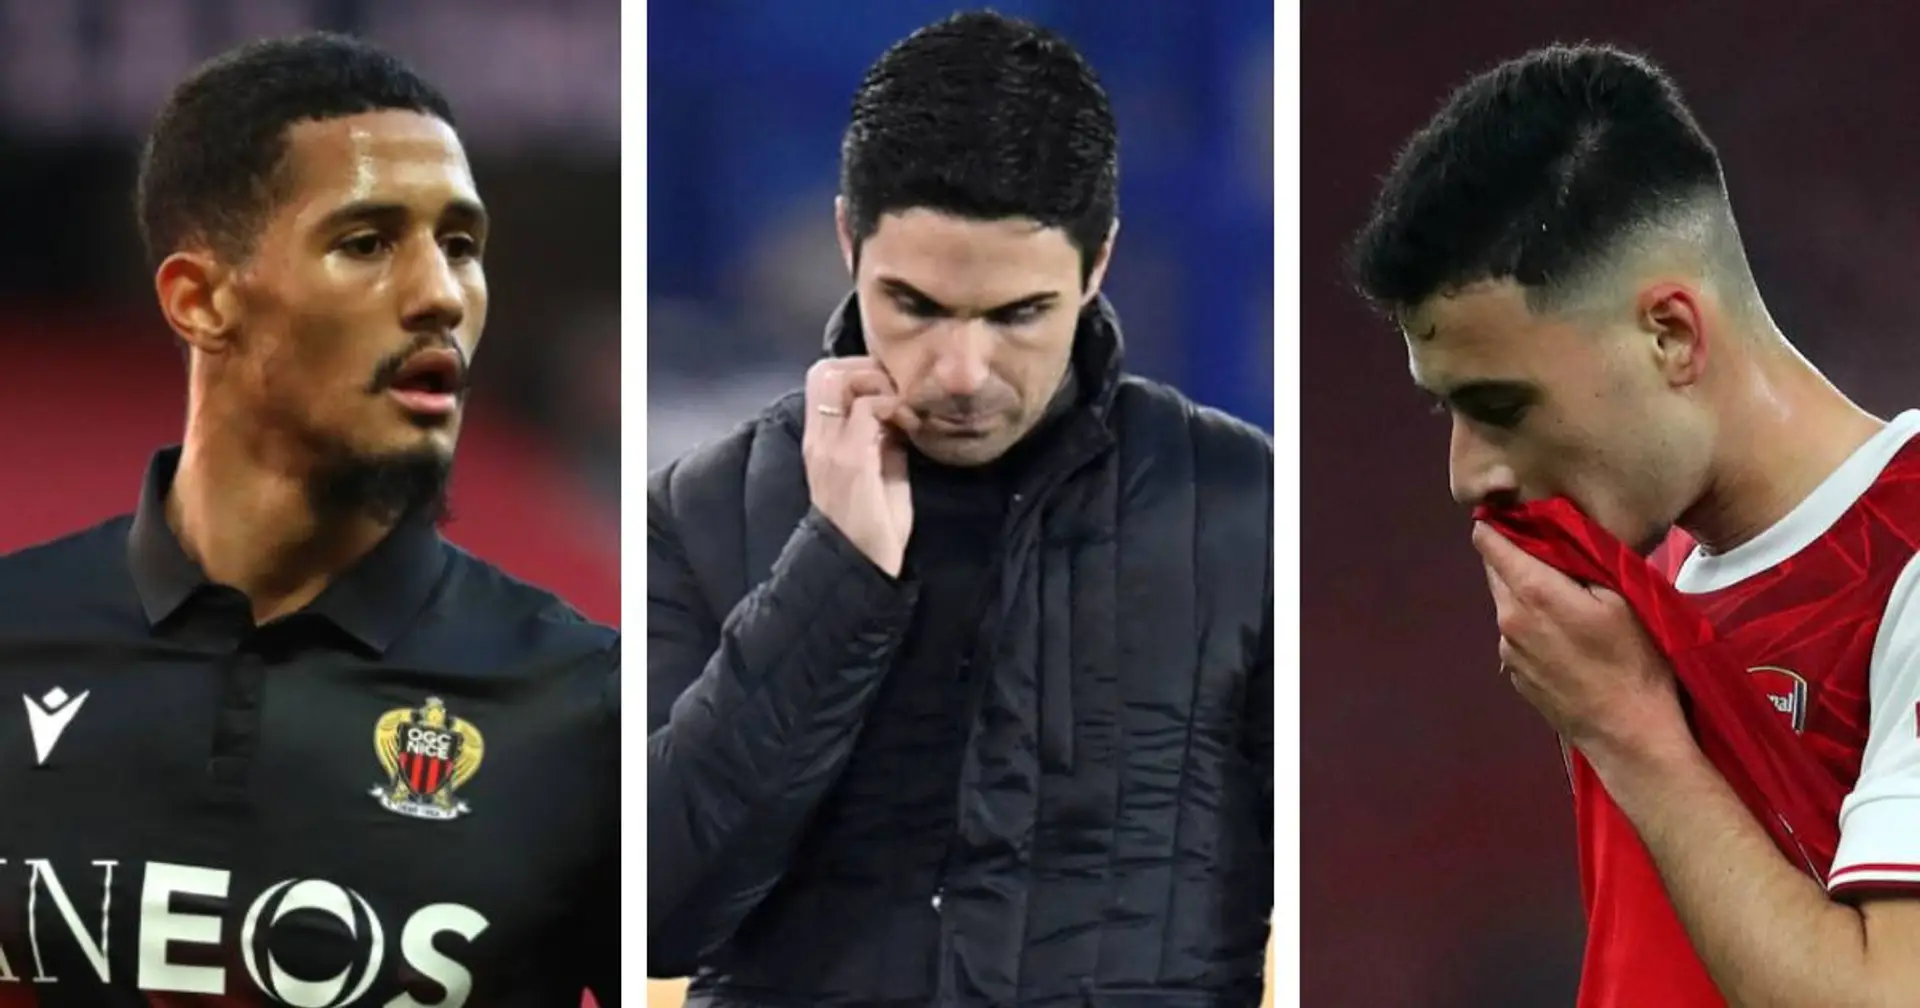 Arteta's radical approach was needed - but is he taking it too far with youngsters?